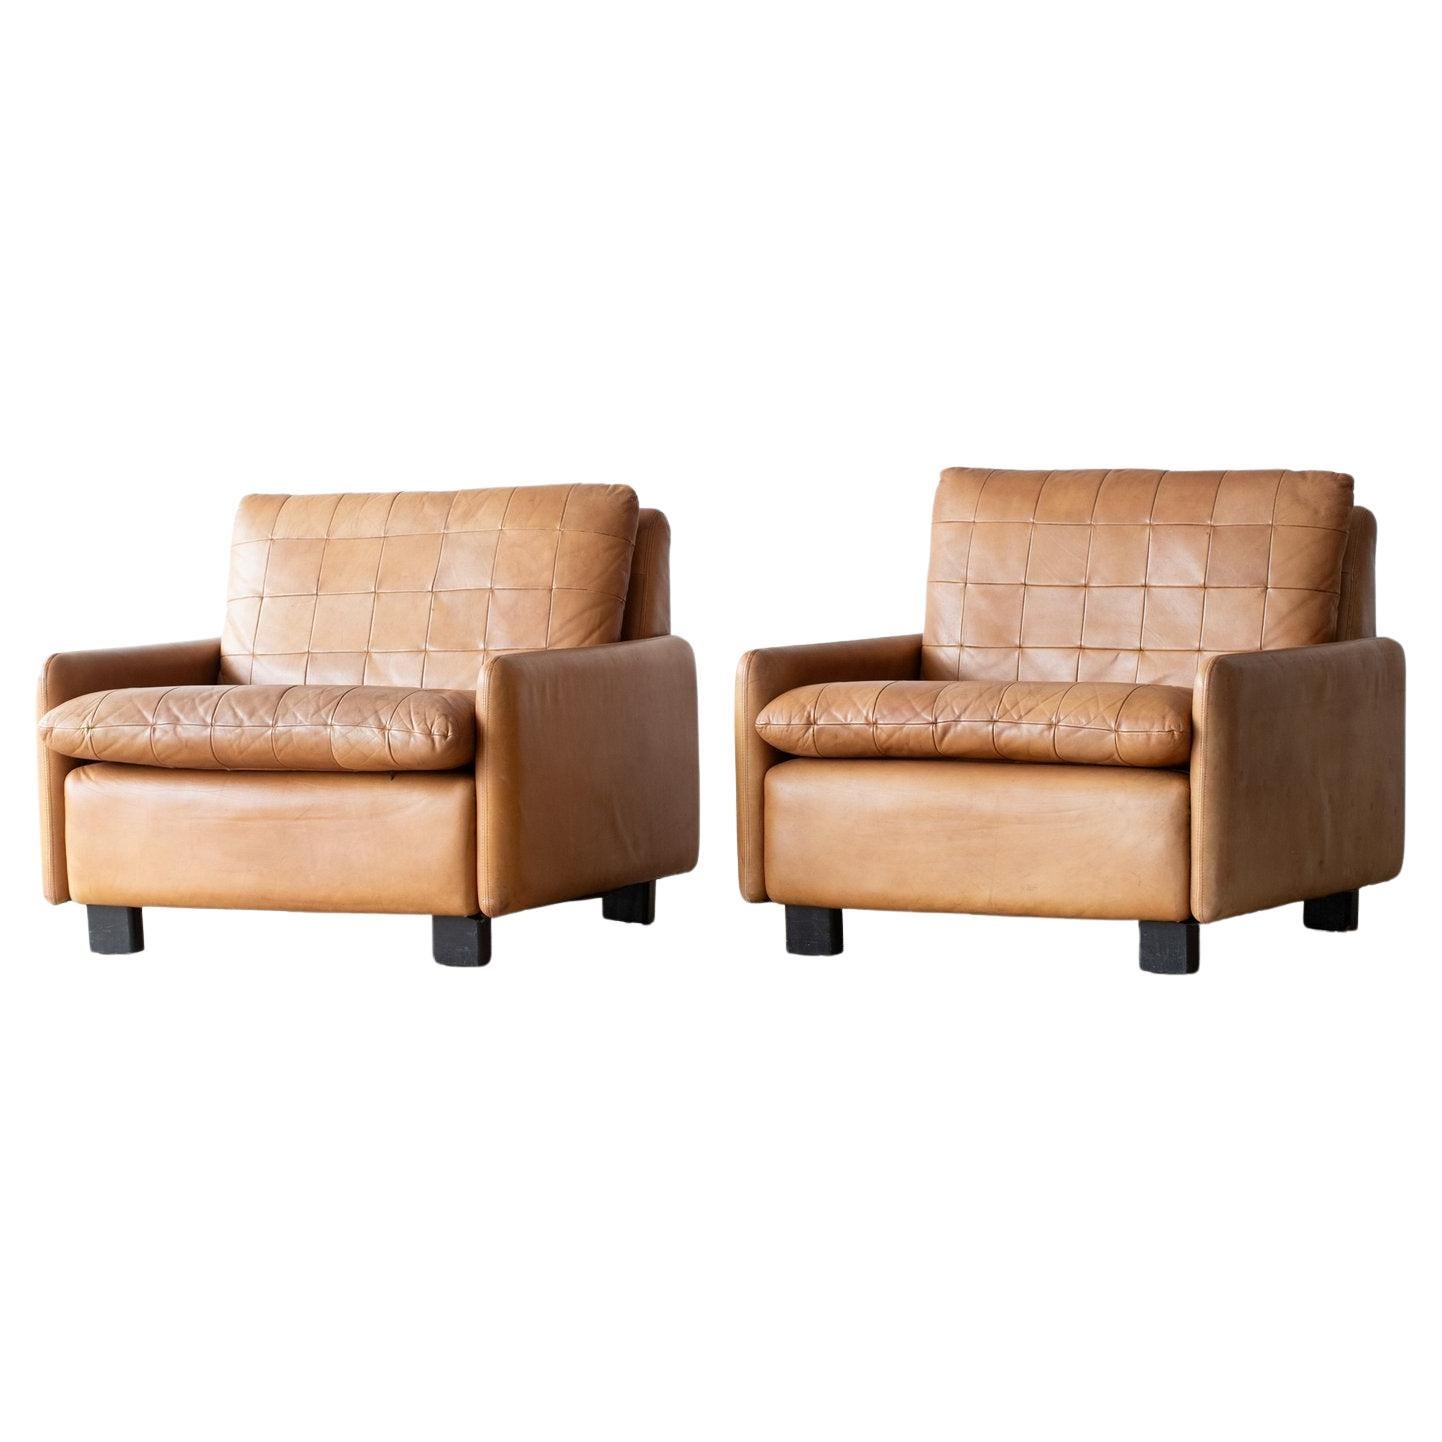 A Pair of 1970s Italian Mid Century Patchwork Tan Leather Club Armchairs For Sale